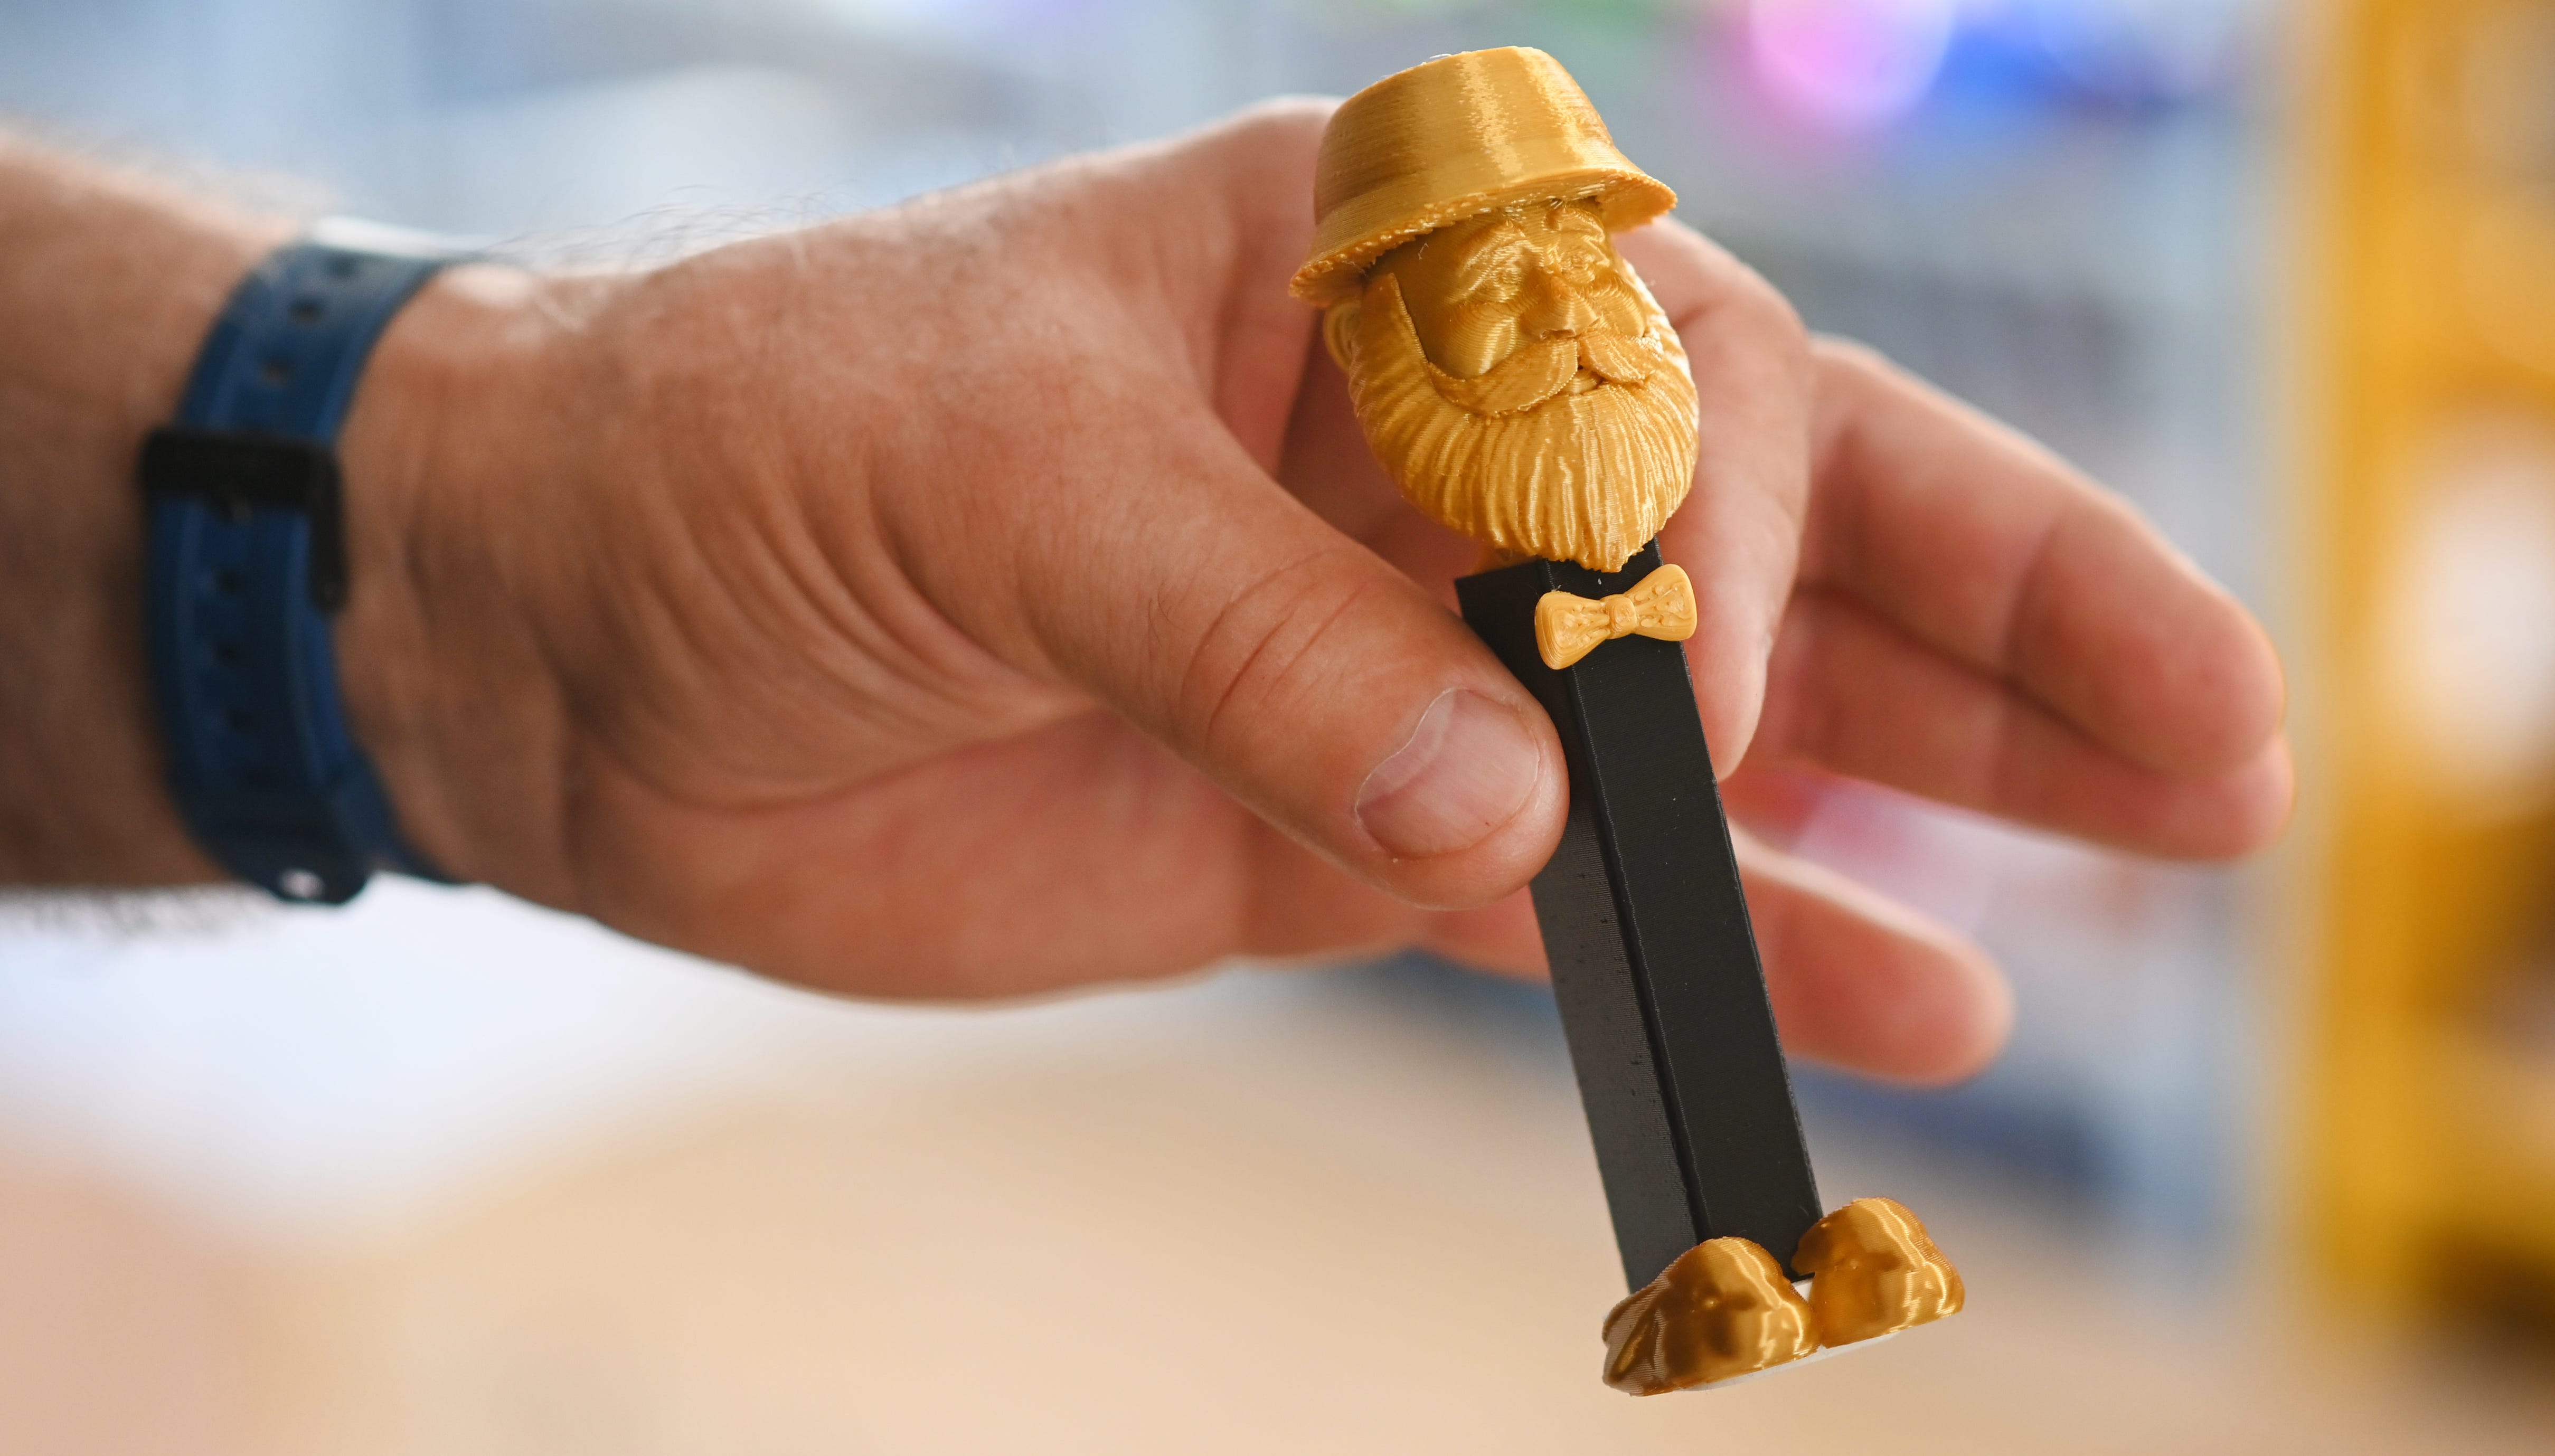 After becoming the subject of a documentary, Steve Glew started selling Pez-like figures called the Pez Outlaw. They feature a series of characters in his likeness dressed in different garb. They’re made by a 3D printing facility in Texas, not by Pez.